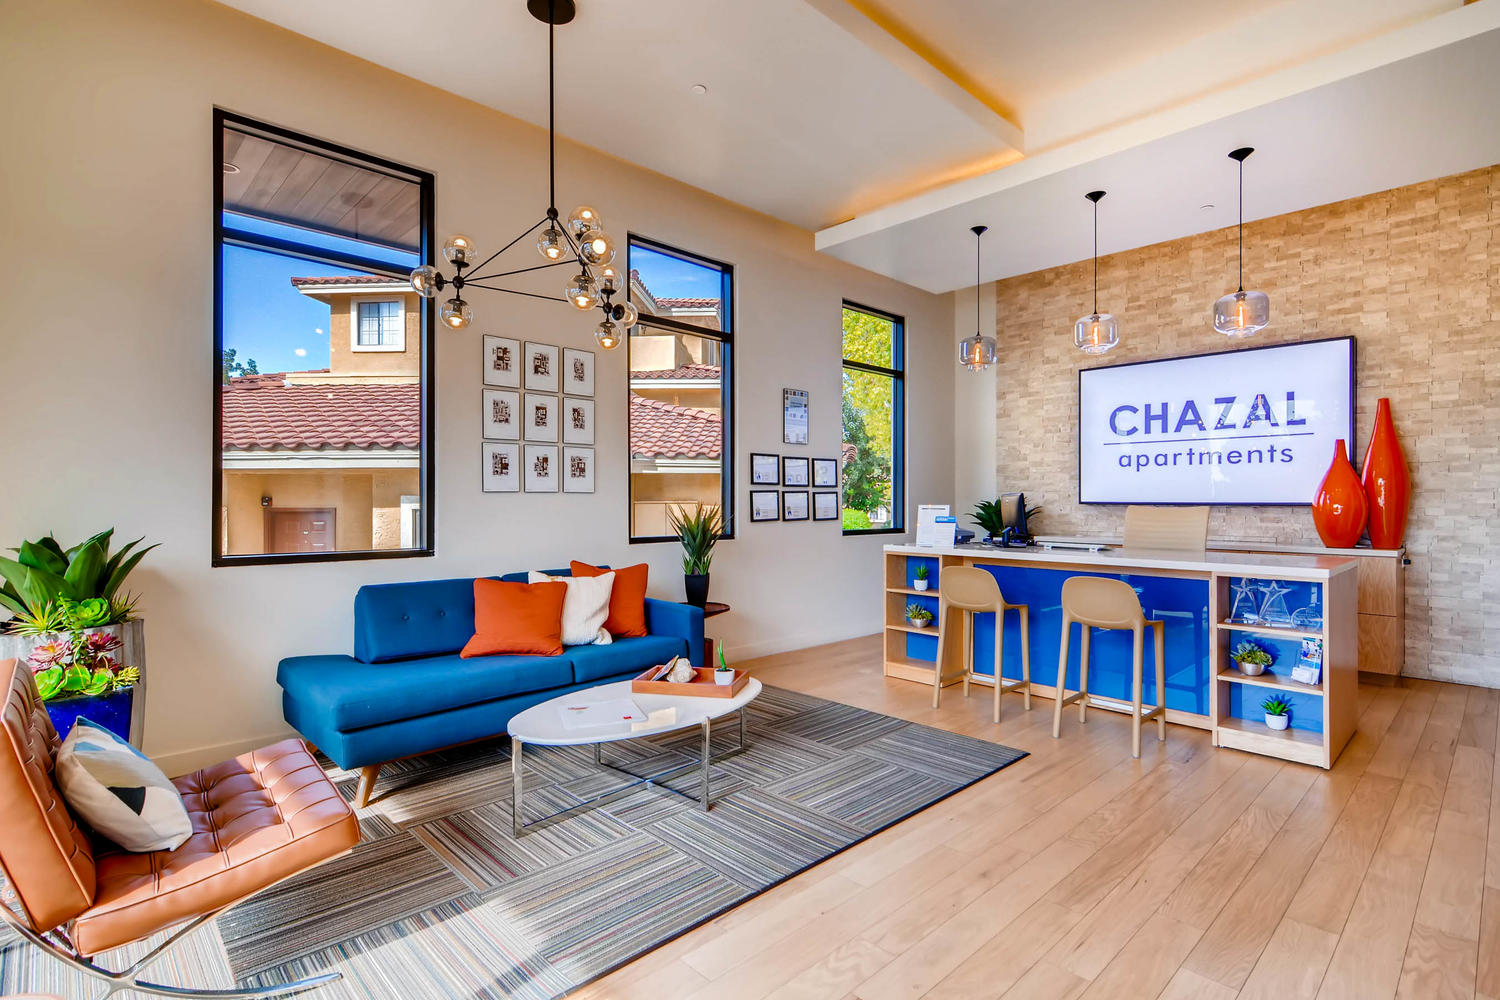 The front desk with the name Chazal Apartments on the sign on the wall